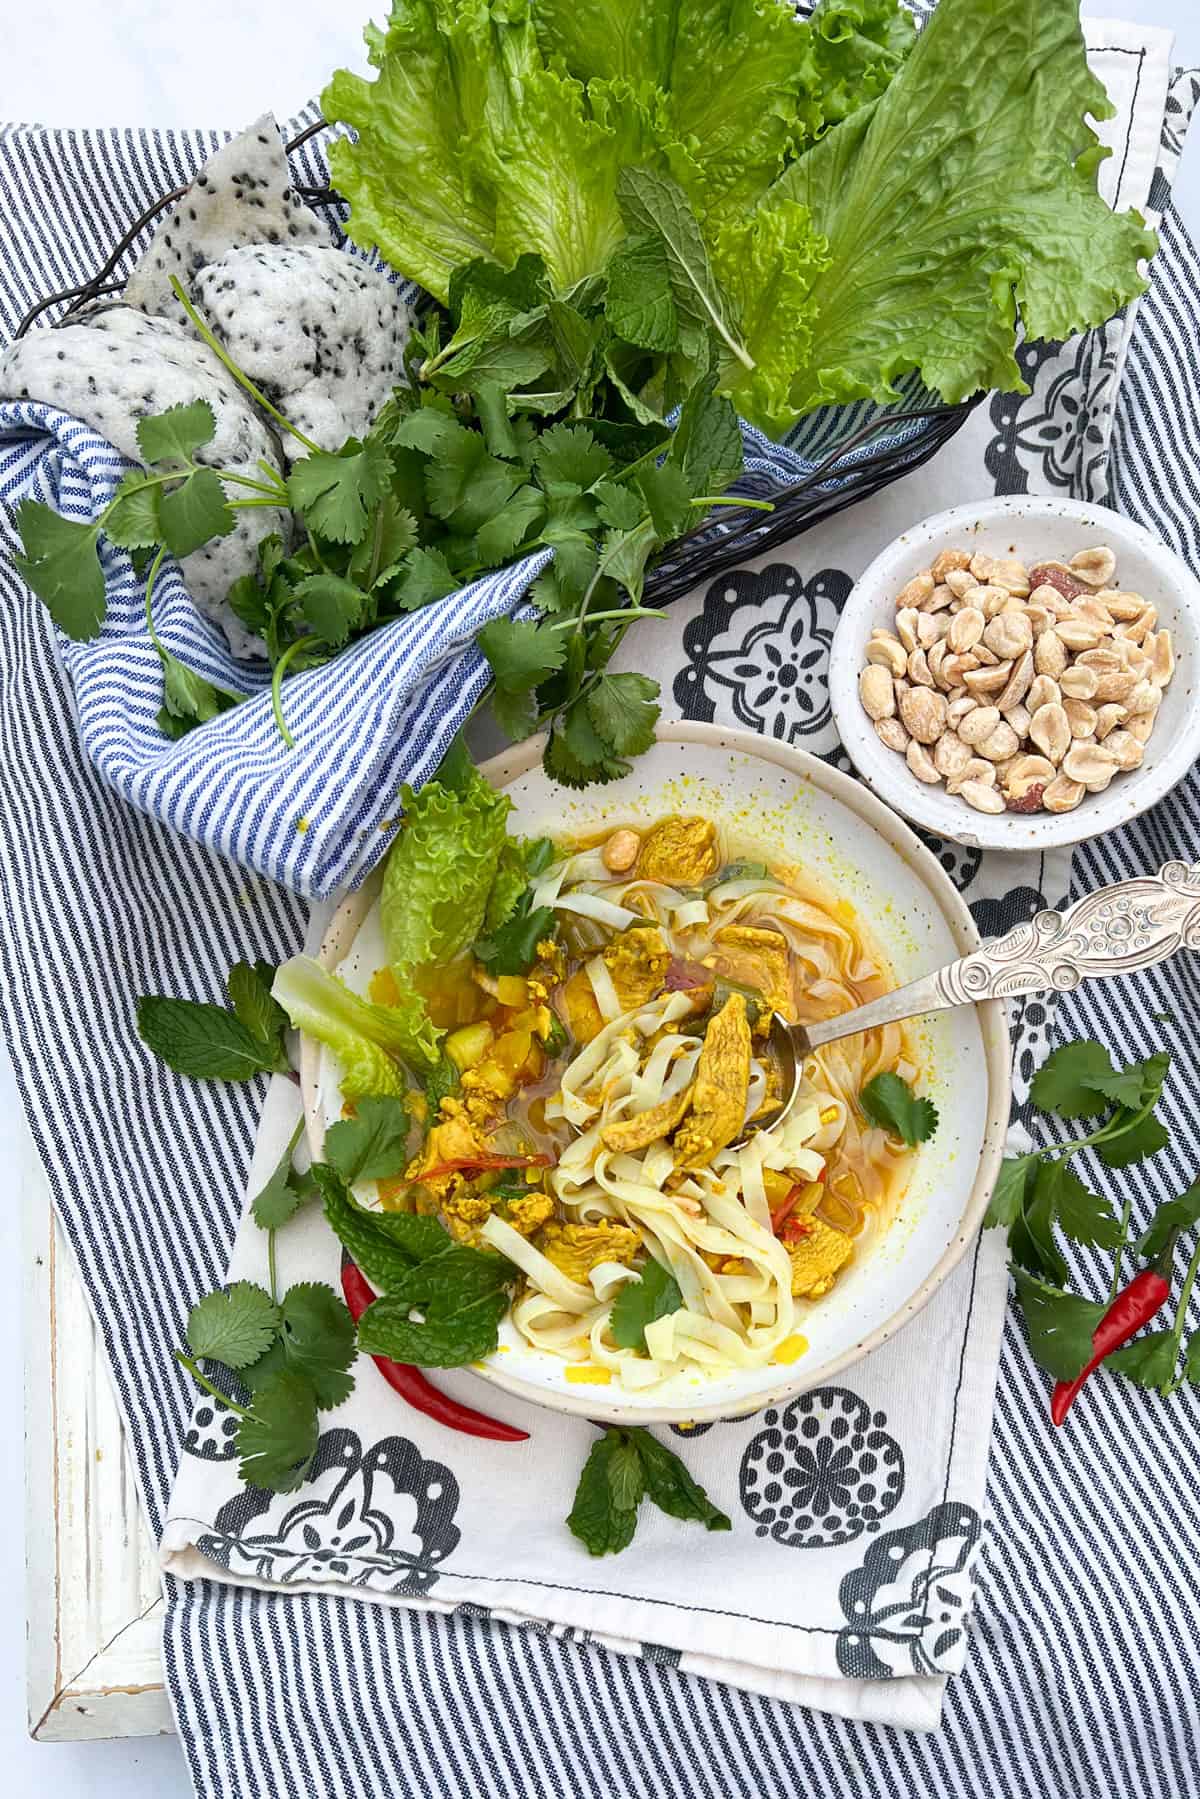 basket of herbs, lettuces and puffy sesame rice crackers next to a bowl of noodles and chicken in turmeric broth and a small bowl of peanuts